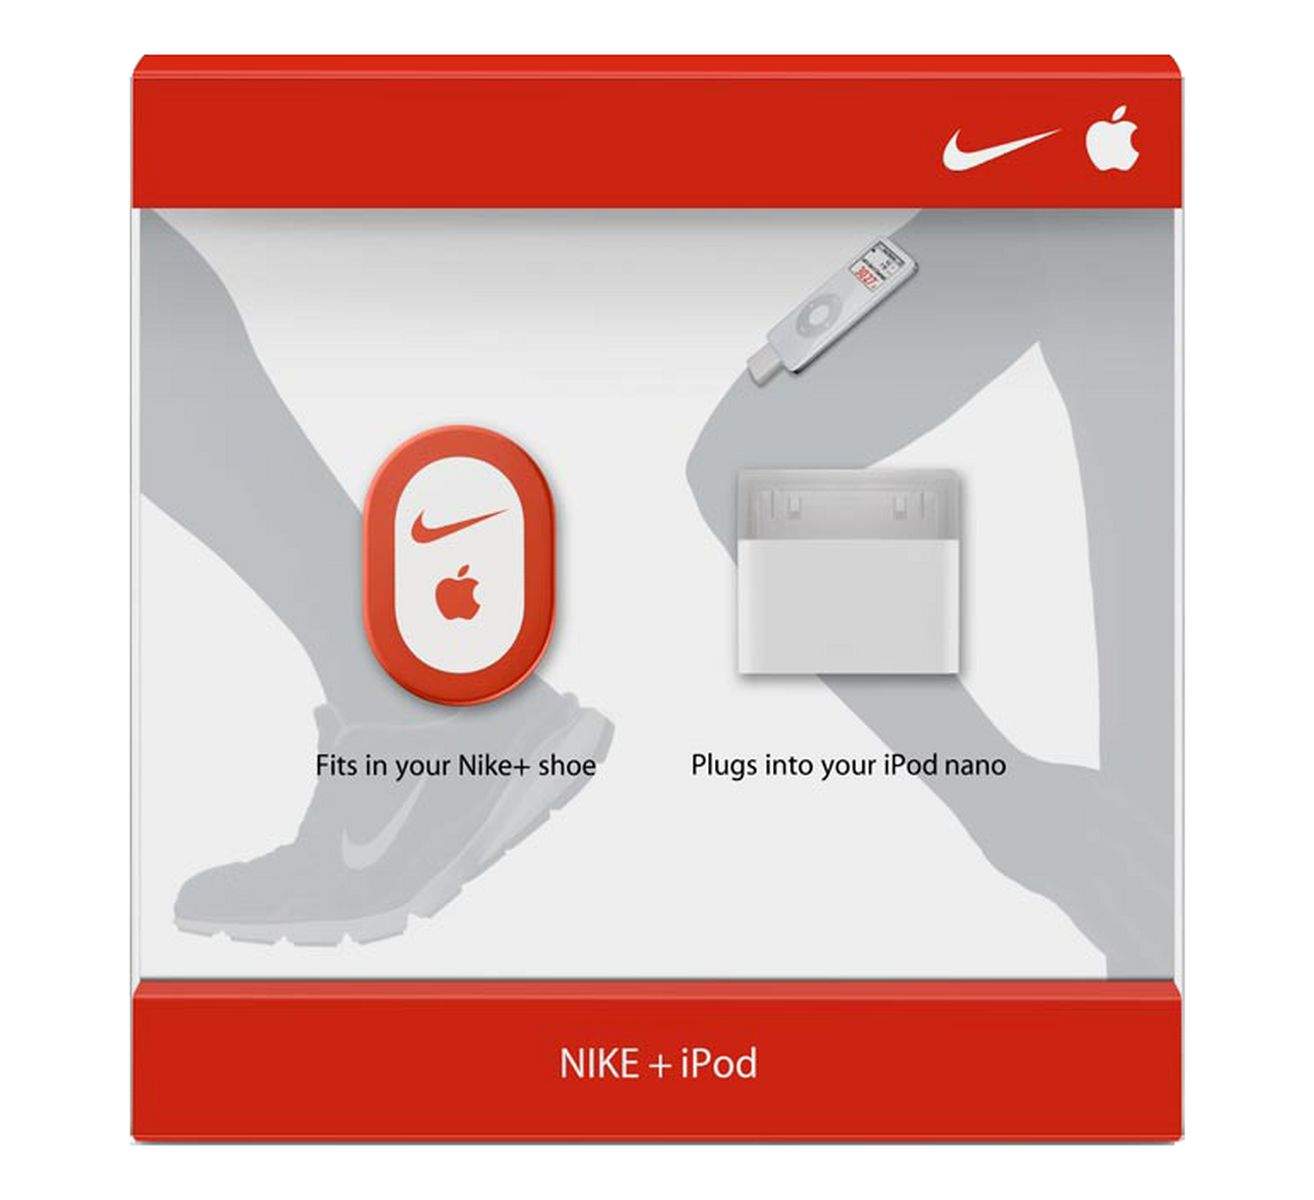 The Nike+iPod Sports Kit was a nifty innovation.